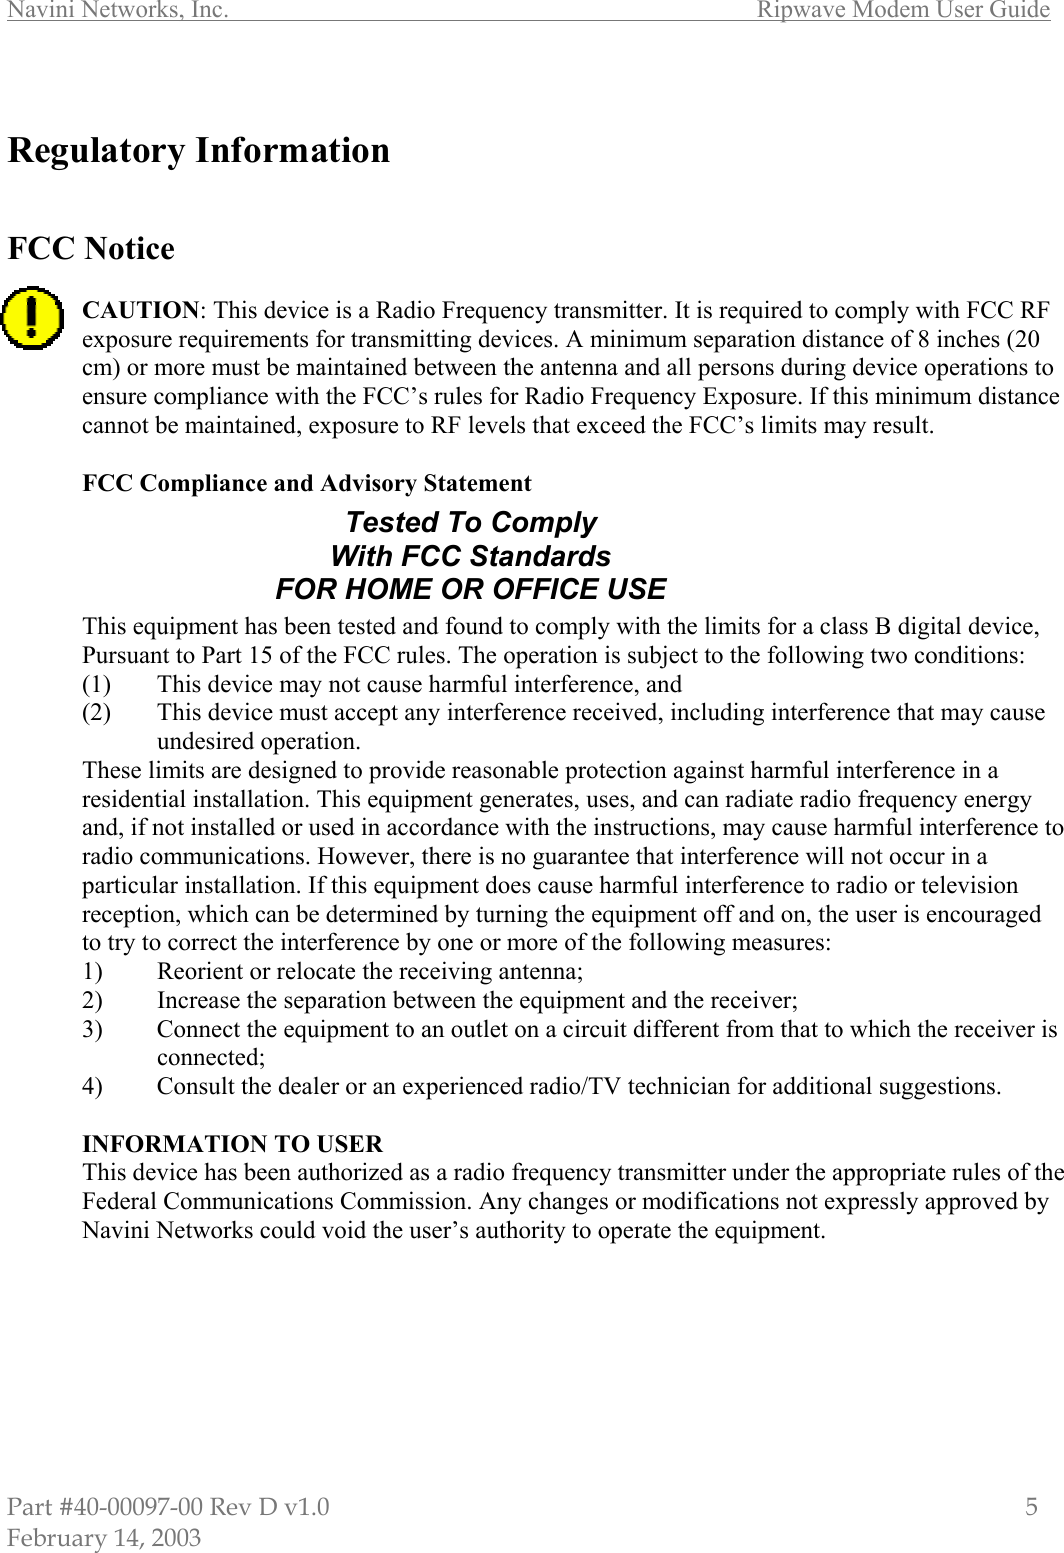 Navini Networks, Inc.        Ripwave Modem User Guide Part #40-00097-00 Rev D v1.0                         5 February 14, 2003  Regulatory Information   FCC Notice  CAUTION: This device is a Radio Frequency transmitter. It is required to comply with FCC RF exposure requirements for transmitting devices. A minimum separation distance of 8 inches (20 cm) or more must be maintained between the antenna and all persons during device operations to ensure compliance with the FCC’s rules for Radio Frequency Exposure. If this minimum distance cannot be maintained, exposure to RF levels that exceed the FCC’s limits may result.   FCC Compliance and Advisory Statement       This equipment has been tested and found to comply with the limits for a class B digital device, Pursuant to Part 15 of the FCC rules. The operation is subject to the following two conditions: (1)  This device may not cause harmful interference, and (2)  This device must accept any interference received, including interference that may cause undesired operation. These limits are designed to provide reasonable protection against harmful interference in a residential installation. This equipment generates, uses, and can radiate radio frequency energy and, if not installed or used in accordance with the instructions, may cause harmful interference to radio communications. However, there is no guarantee that interference will not occur in a particular installation. If this equipment does cause harmful interference to radio or television reception, which can be determined by turning the equipment off and on, the user is encouraged to try to correct the interference by one or more of the following measures: 1)  Reorient or relocate the receiving antenna; 2)  Increase the separation between the equipment and the receiver; 3)  Connect the equipment to an outlet on a circuit different from that to which the receiver is connected; 4)  Consult the dealer or an experienced radio/TV technician for additional suggestions.  INFORMATION TO USER This device has been authorized as a radio frequency transmitter under the appropriate rules of the Federal Communications Commission. Any changes or modifications not expressly approved by Navini Networks could void the user’s authority to operate the equipment. Tested To Comply With FCC Standards FOR HOME OR OFFICE USE